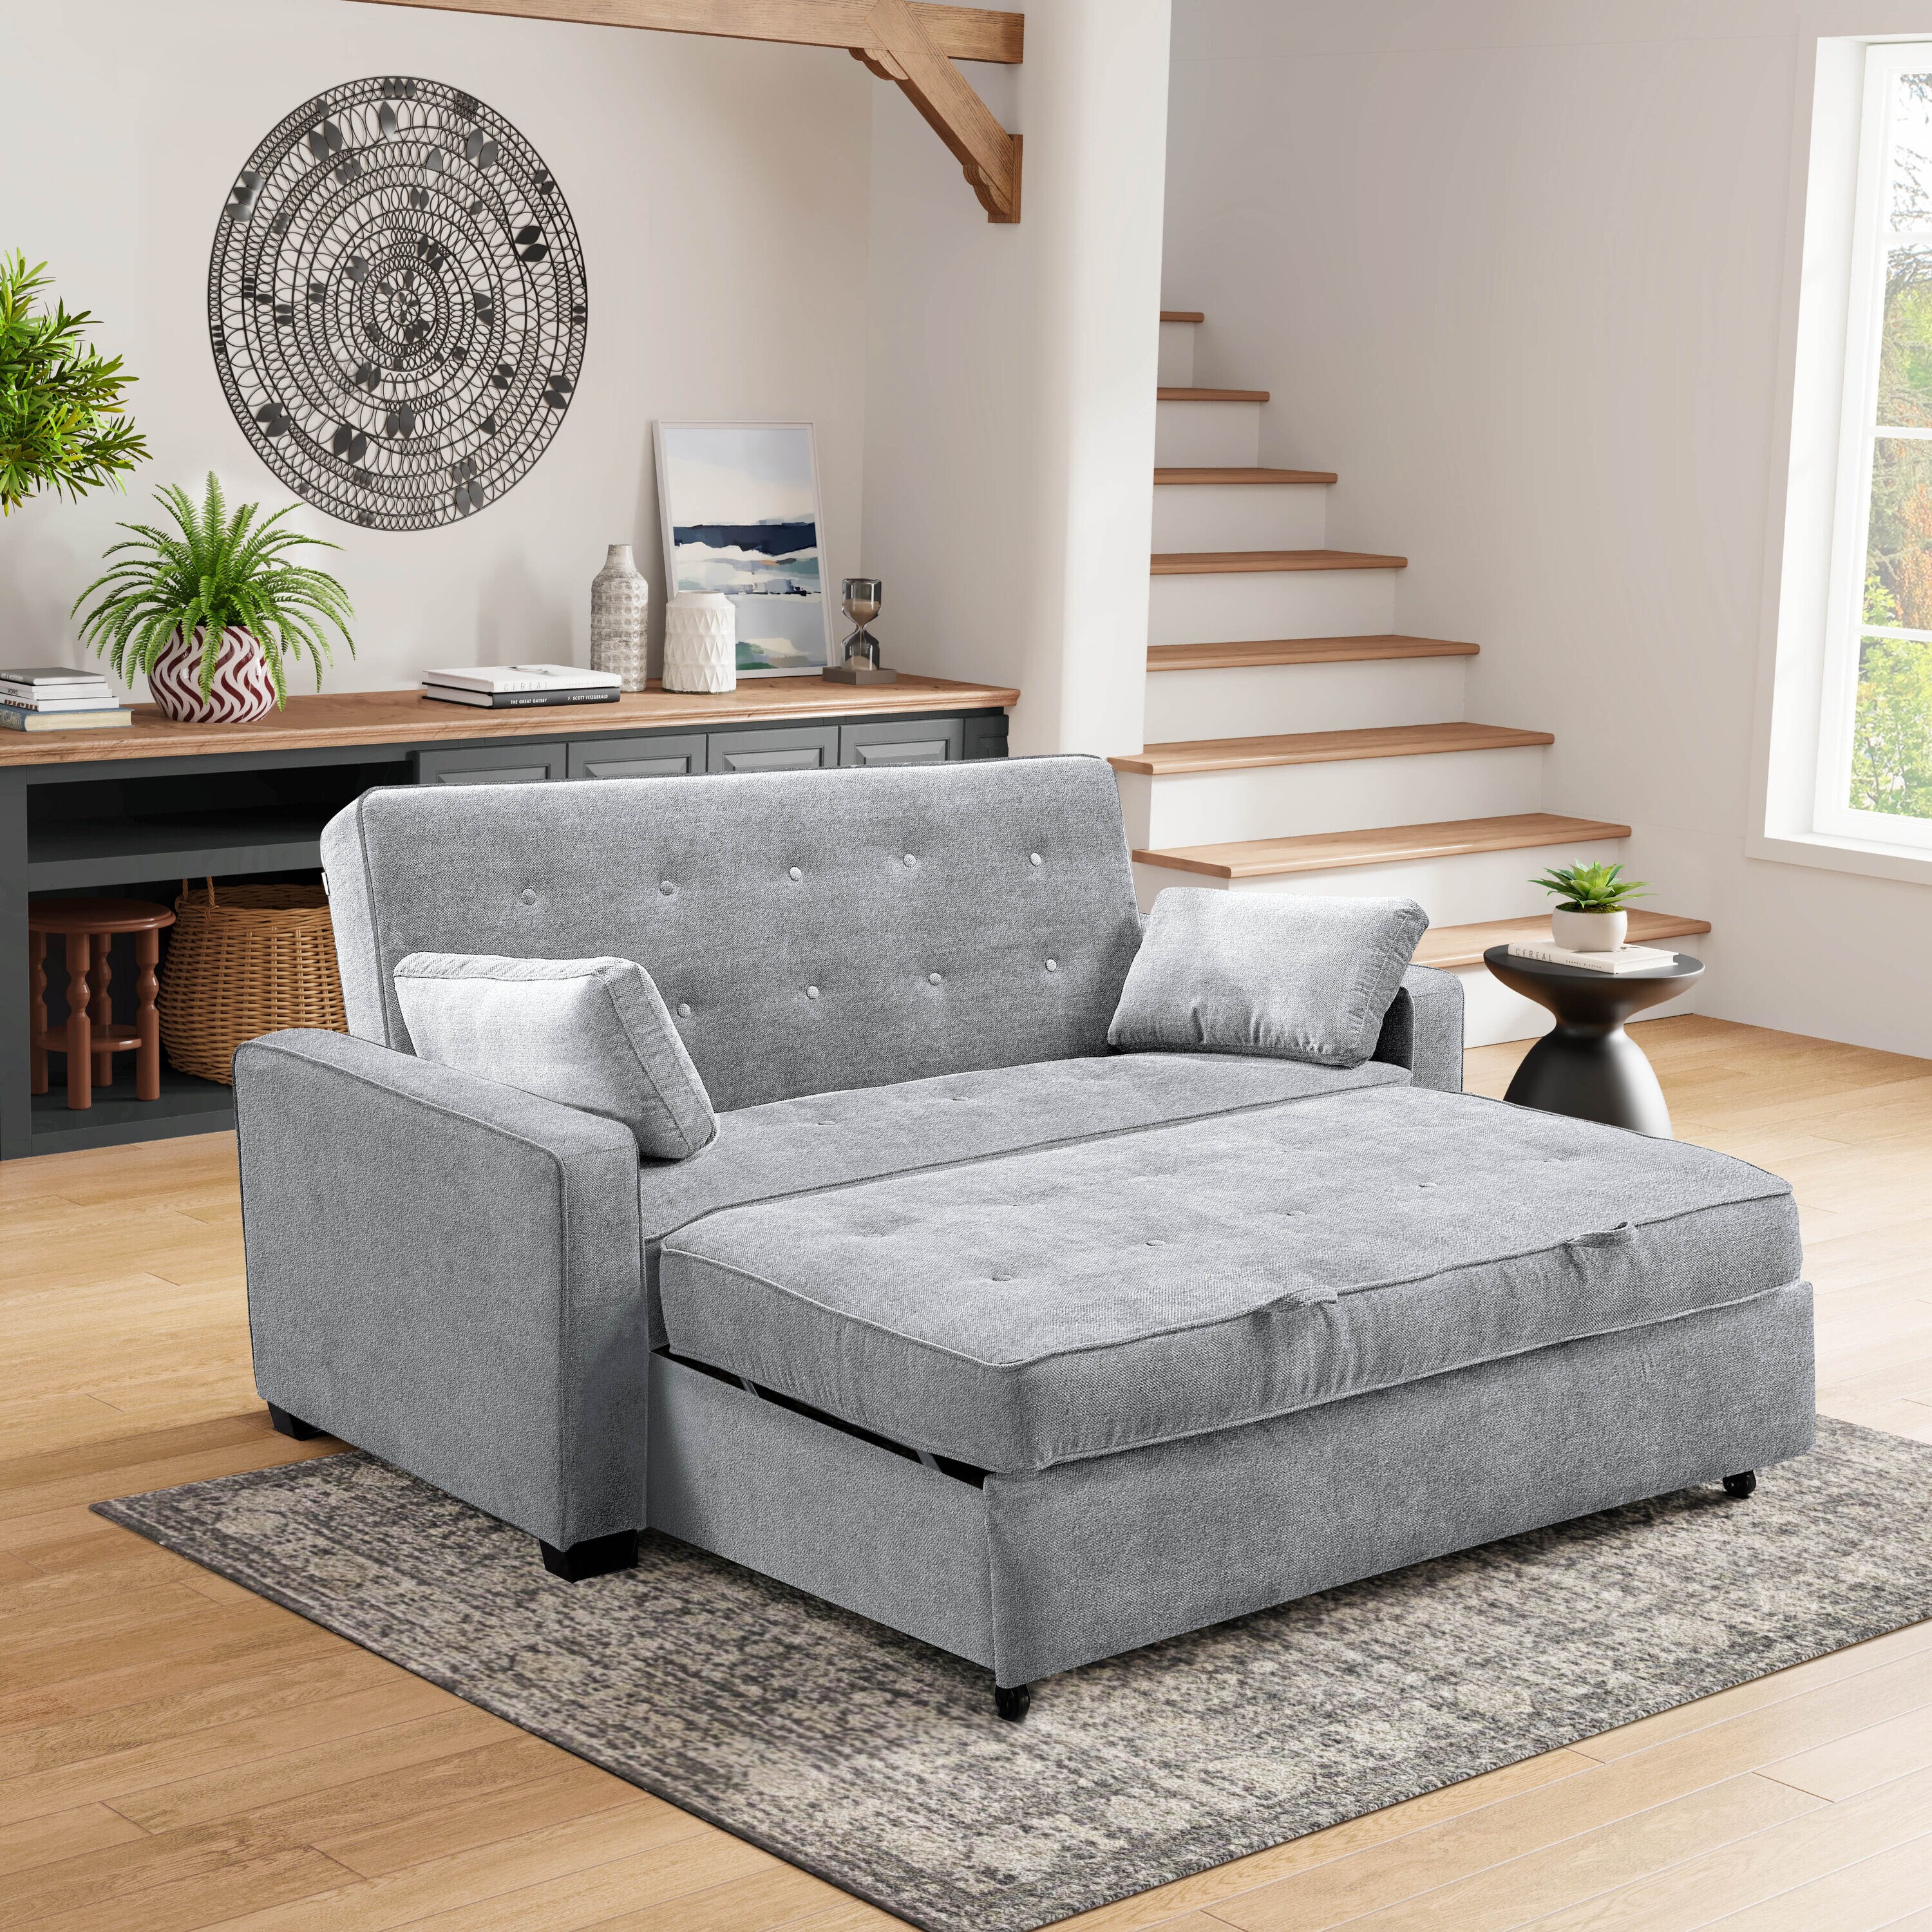 Couches, in Polyester/Blend Modern Light Arya Loveseats Serta 66.5-in department & Sofa Sofas Grey the at 2-seater